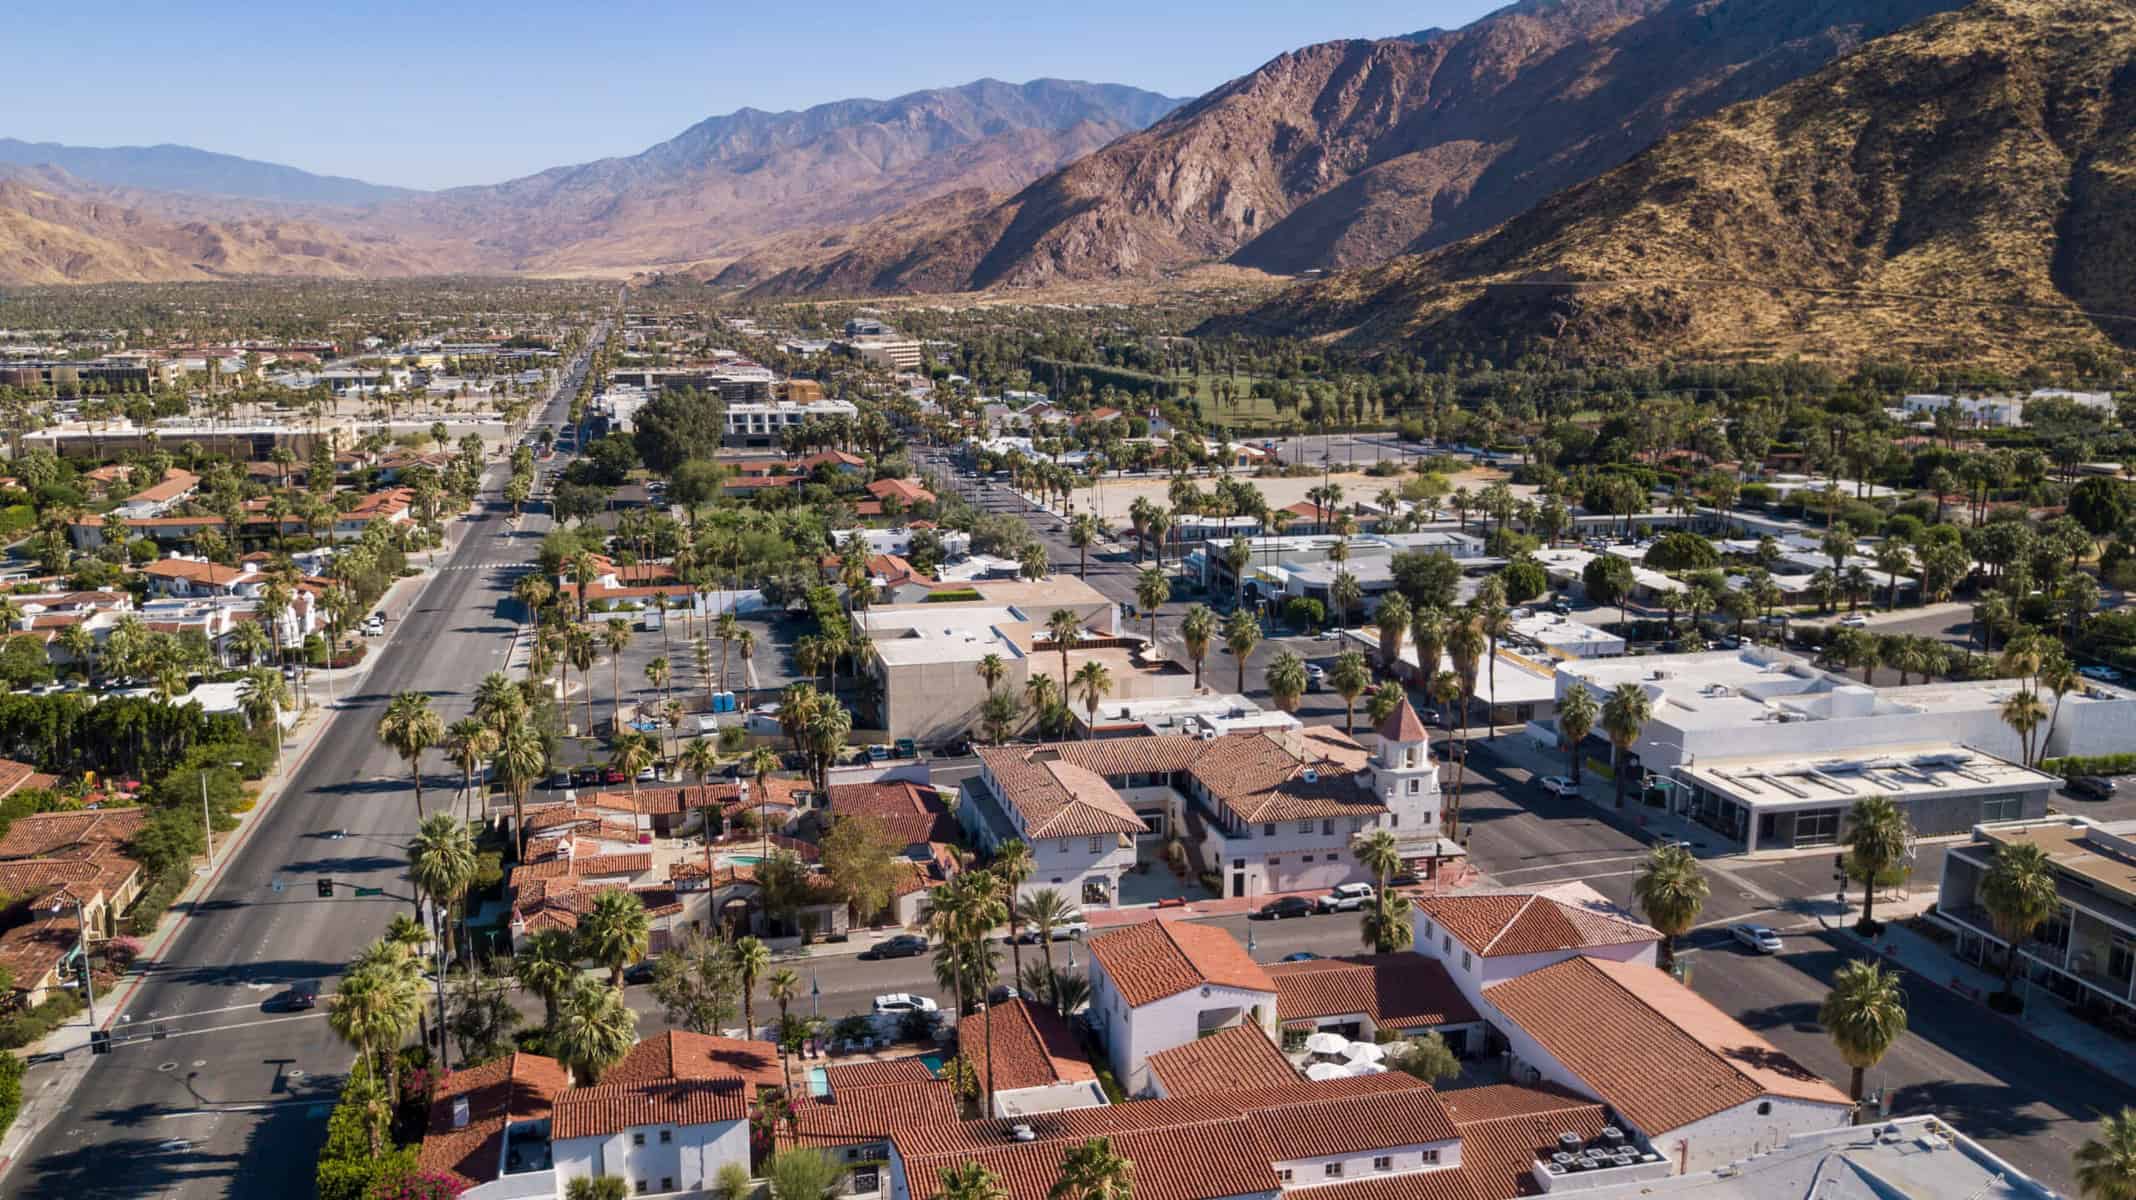 33+ EPIC & Fun Things to Do in Palm Springs - Jen on the Run